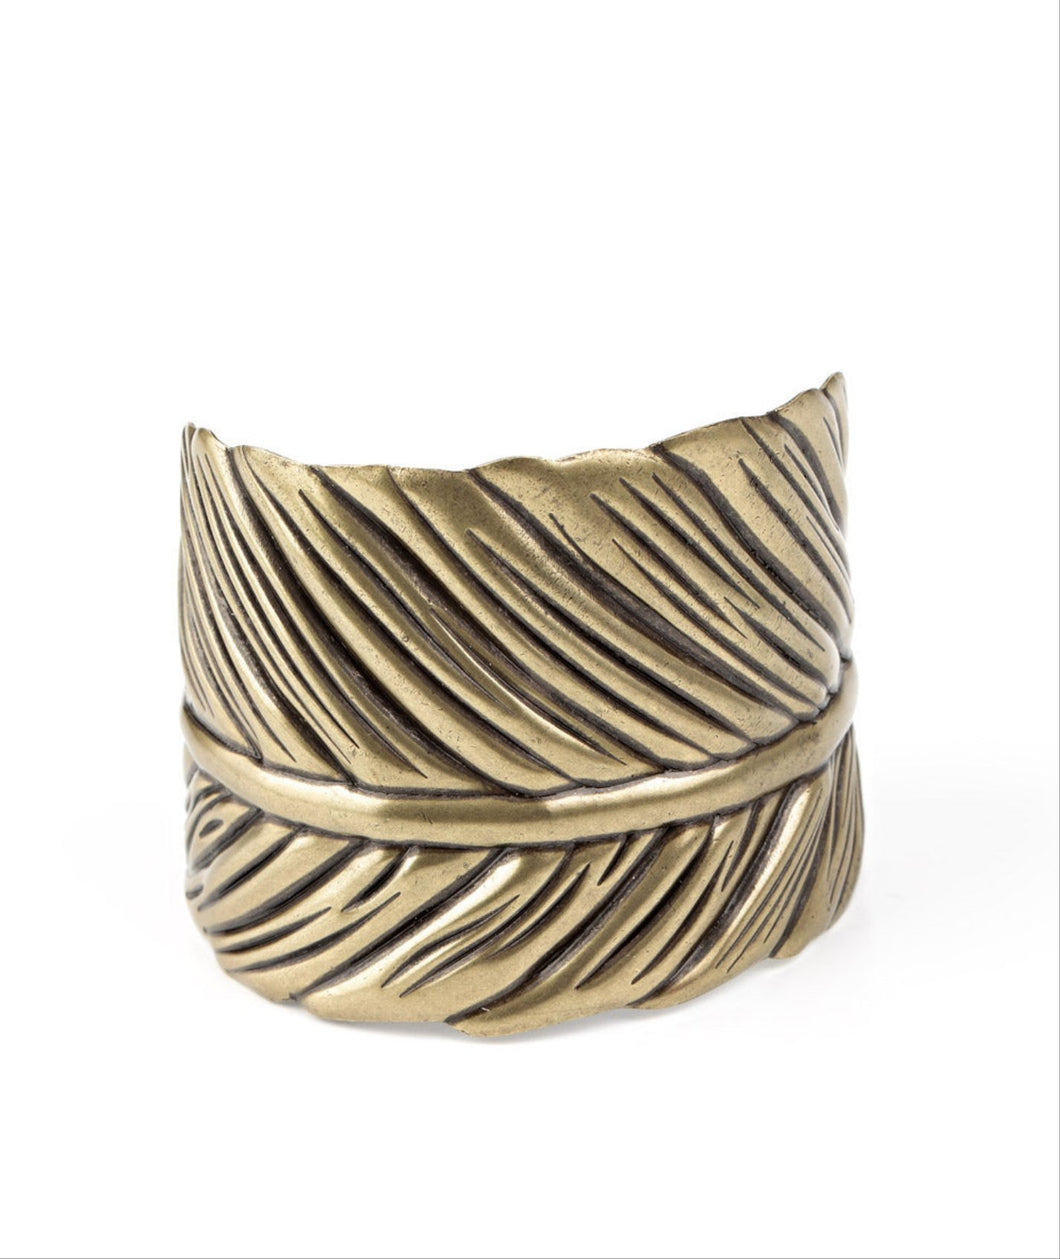 Where There's a QUILL, There's a Way Brass Bracelet